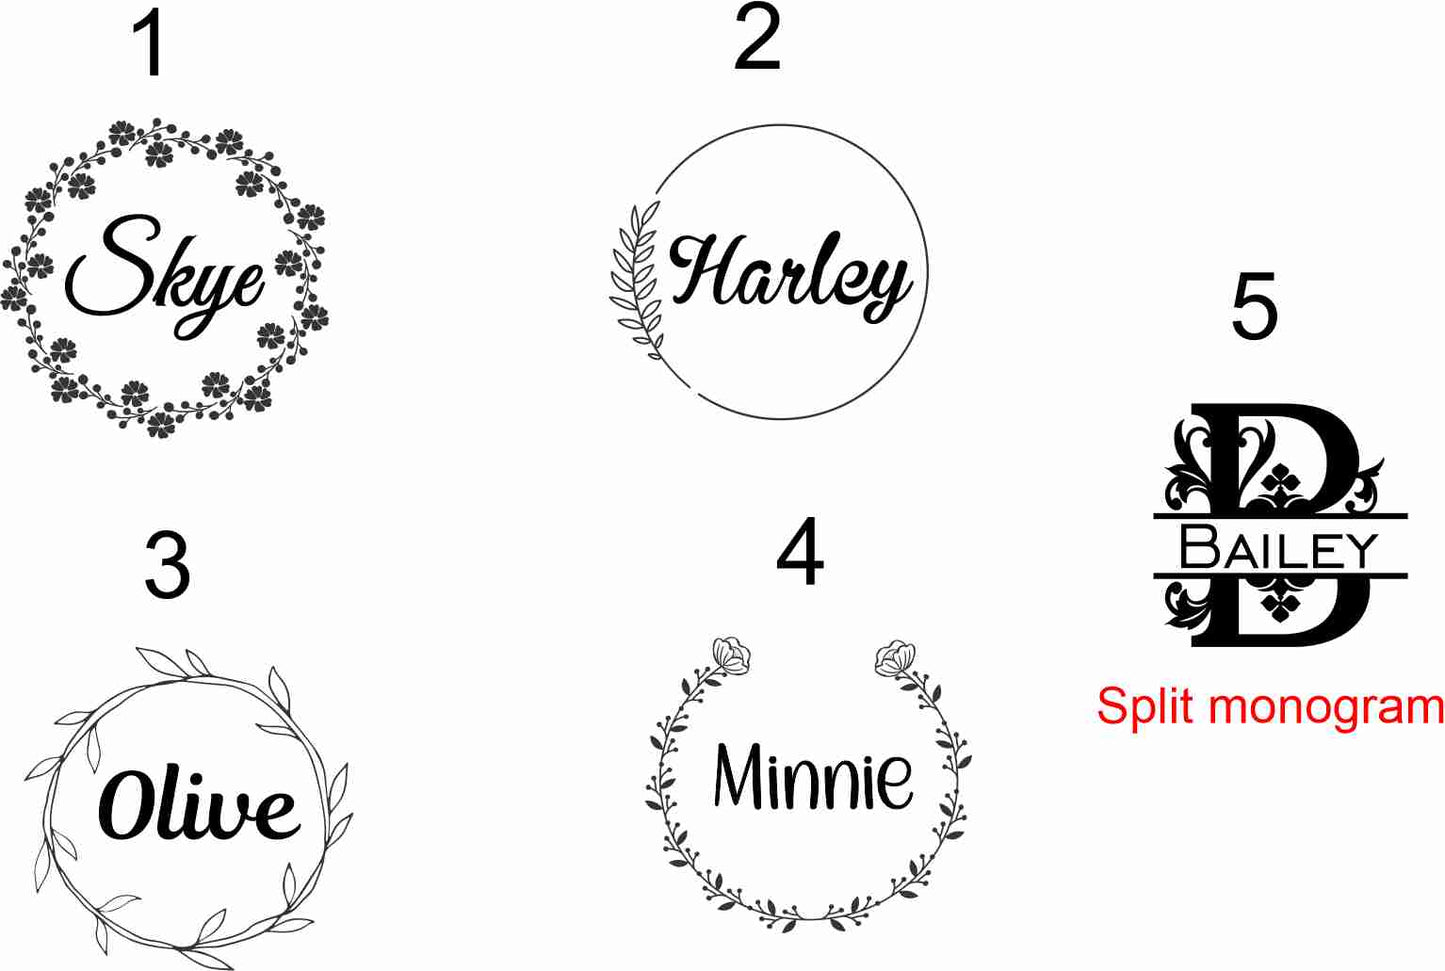 Personalised Pet ID tag - Round shape - Etch Cetera 